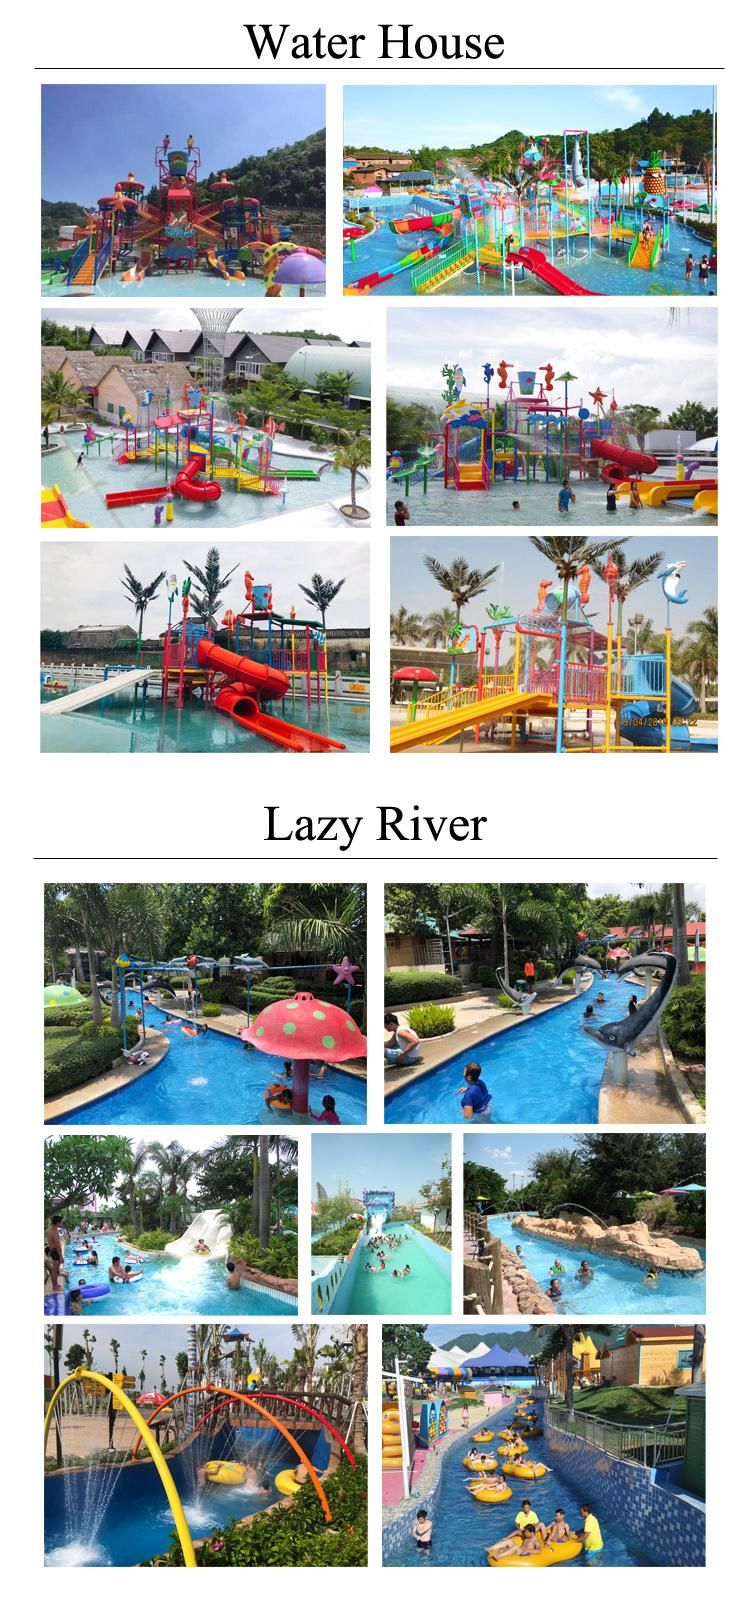 Middle Aqua Park Playground for Water Park